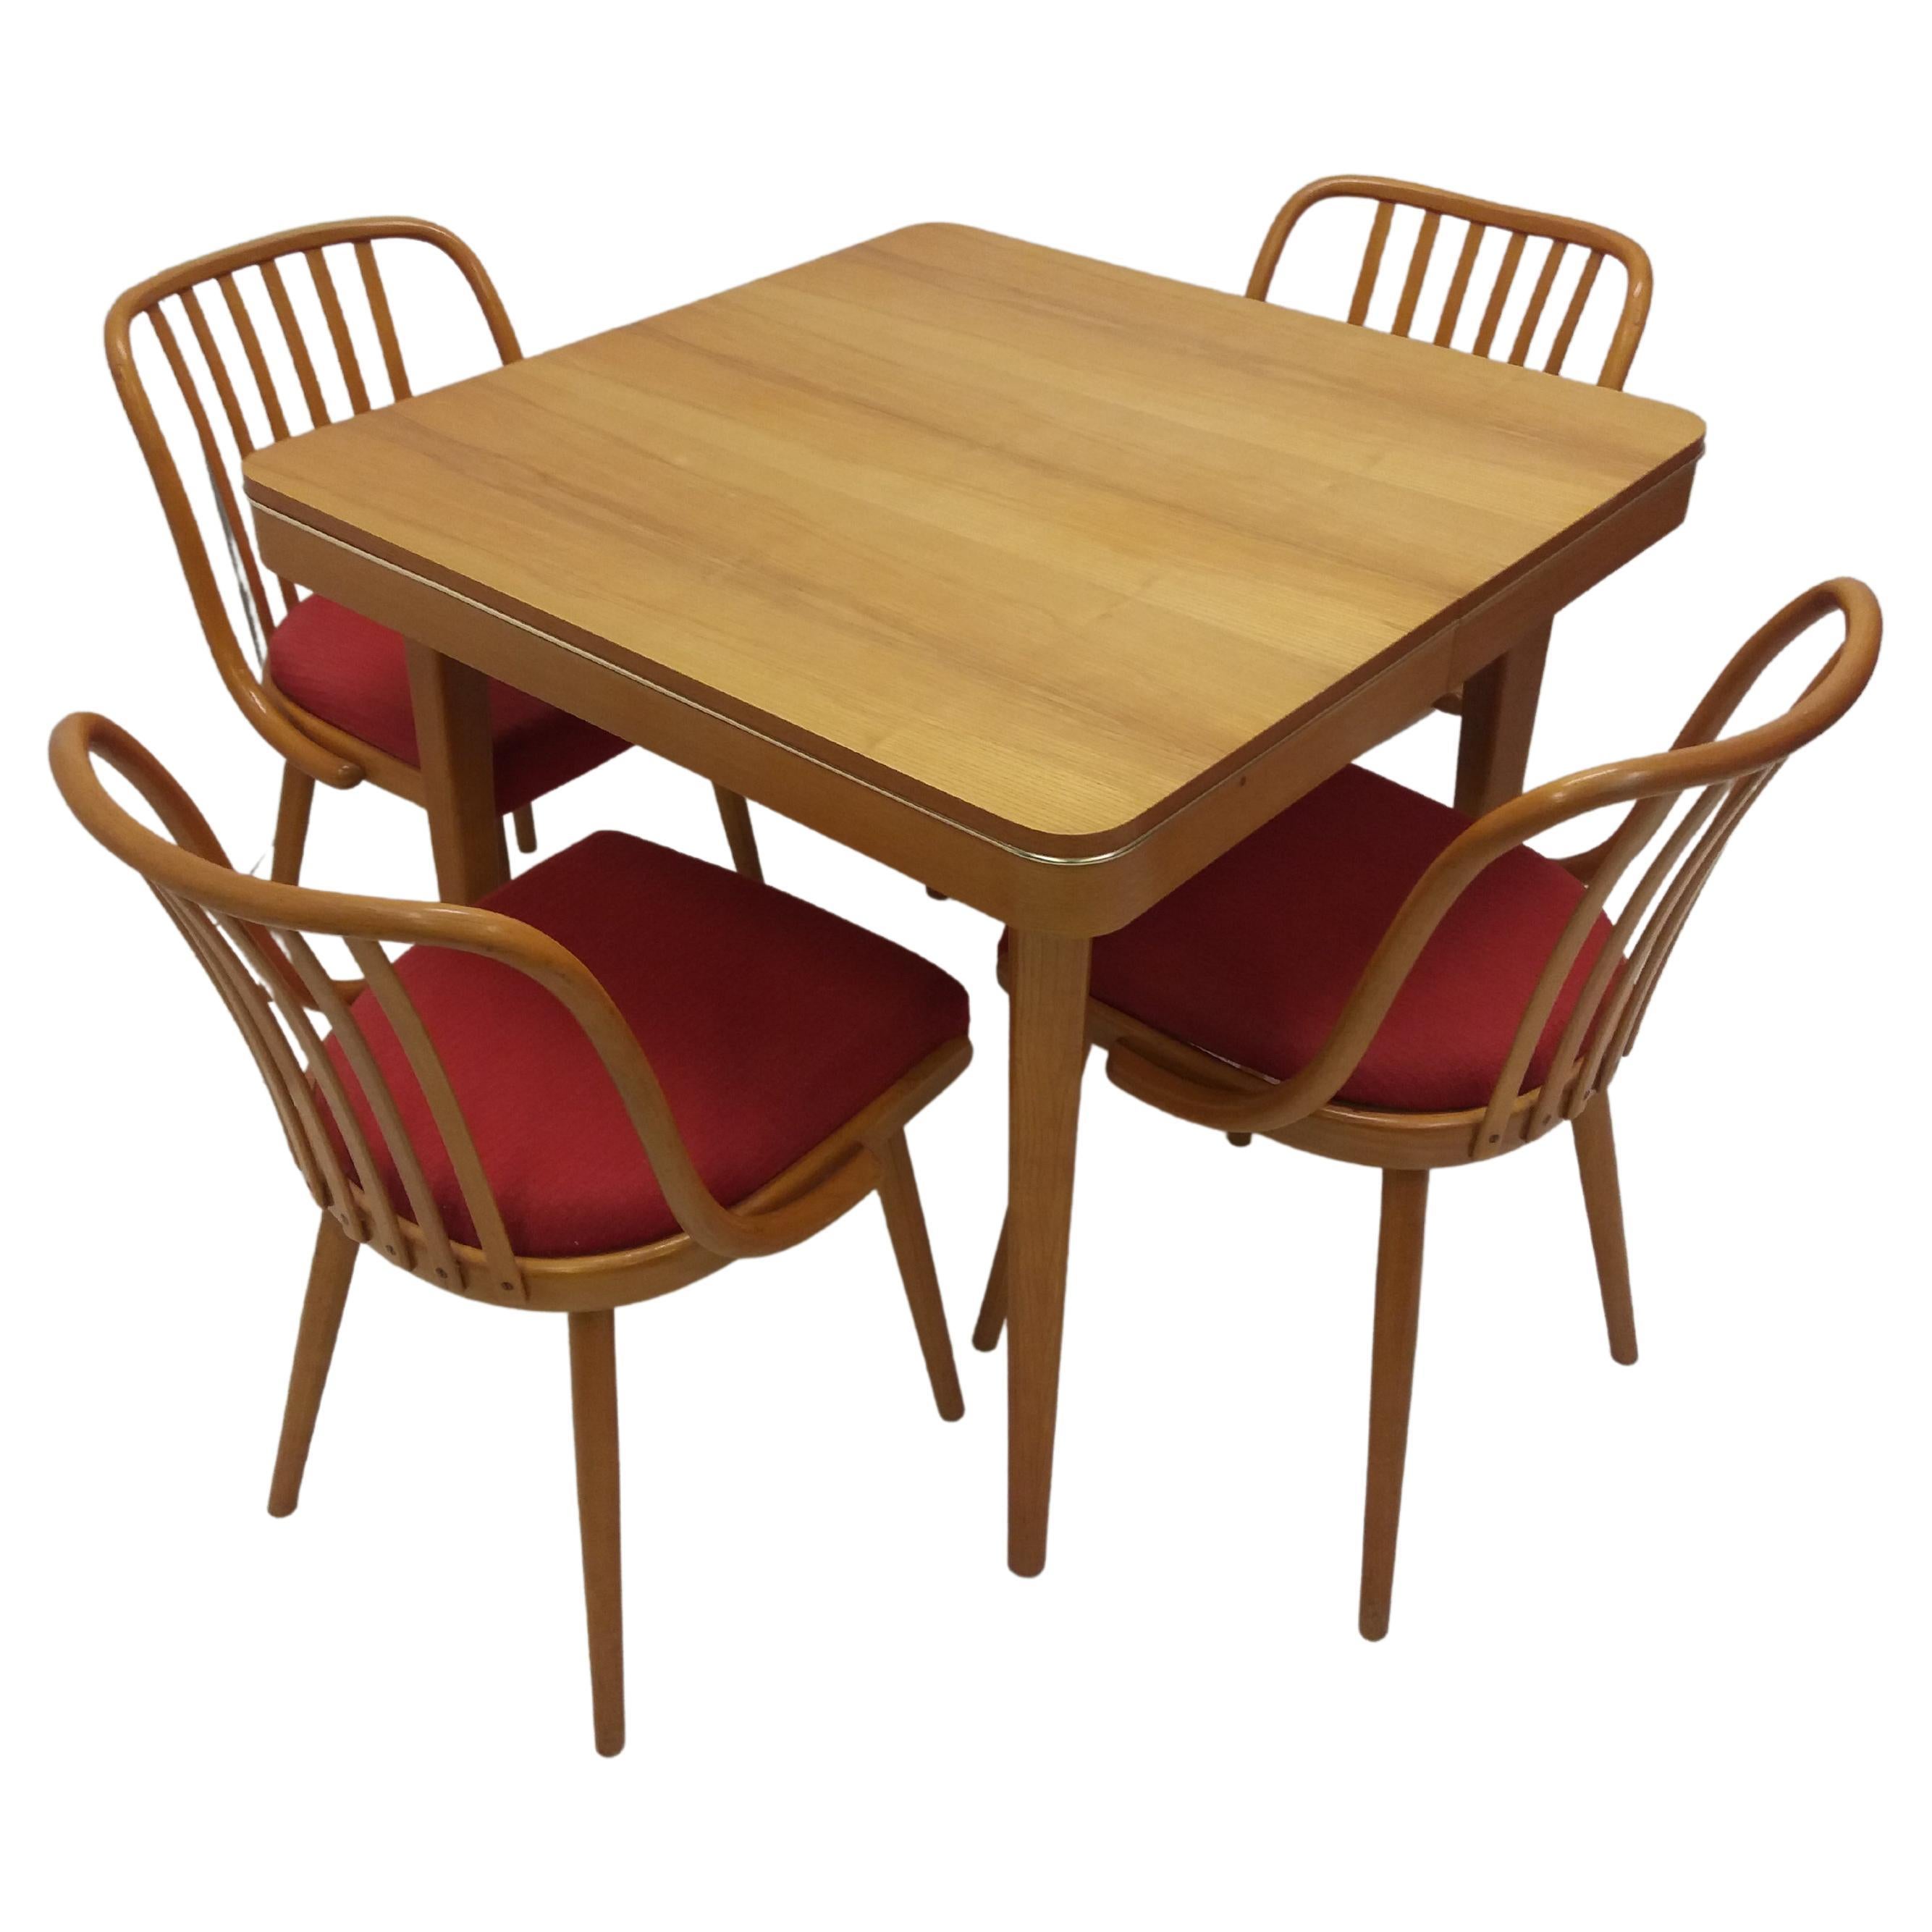 1960 Set of 4 Retro Suman Chairs and Table, Czechoslovakia